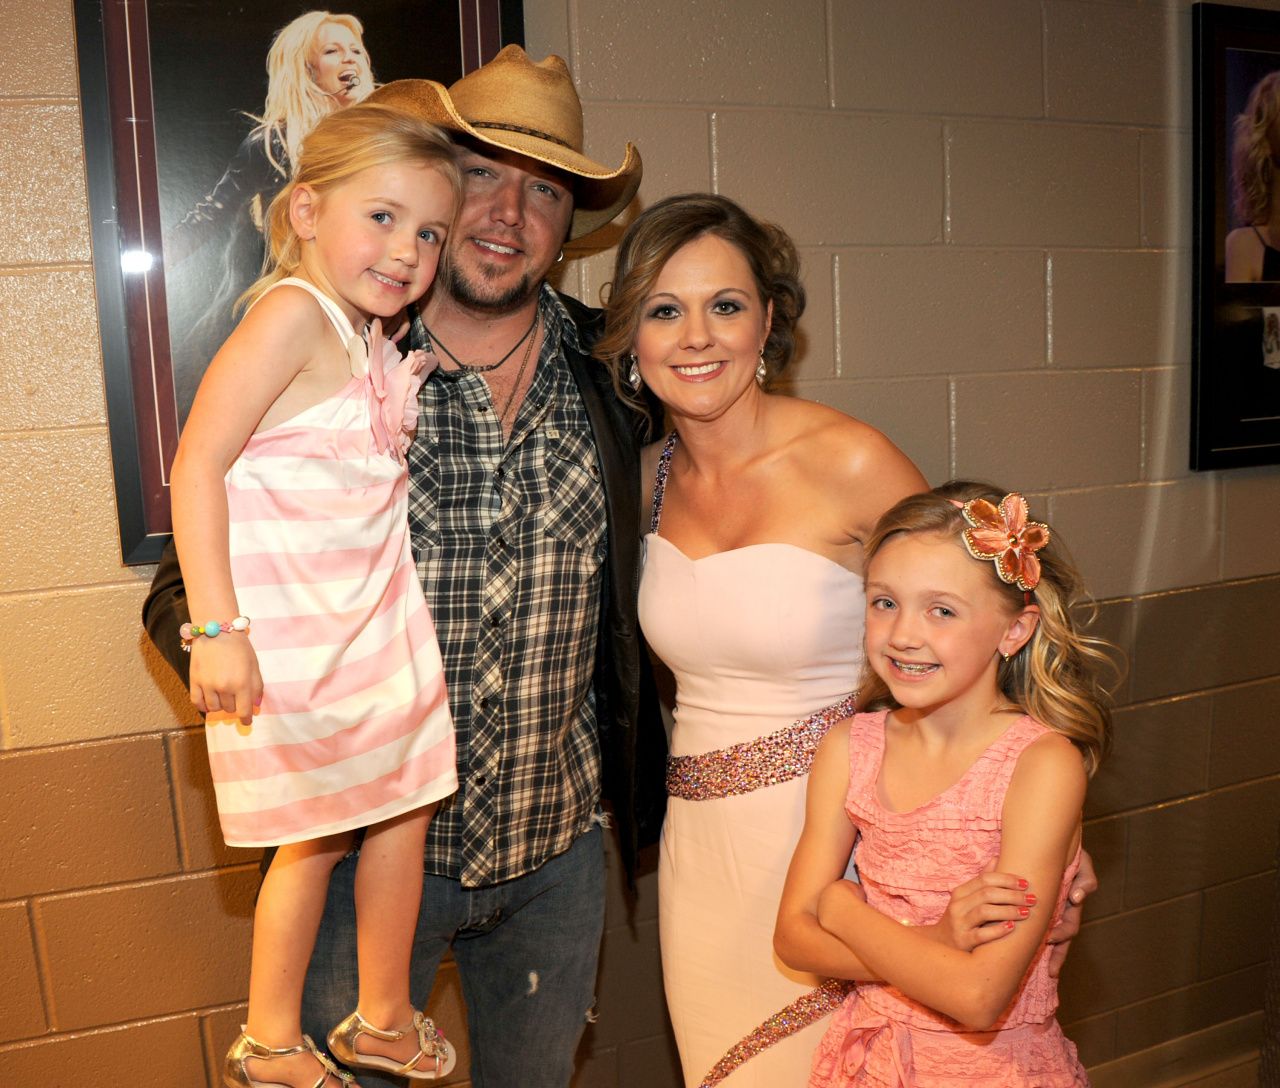 Jason Aldean and his first estranged wife, Jessica Ussery with their two children. Do you know about Jason's second marriage with current wife, Brittany Kerr?